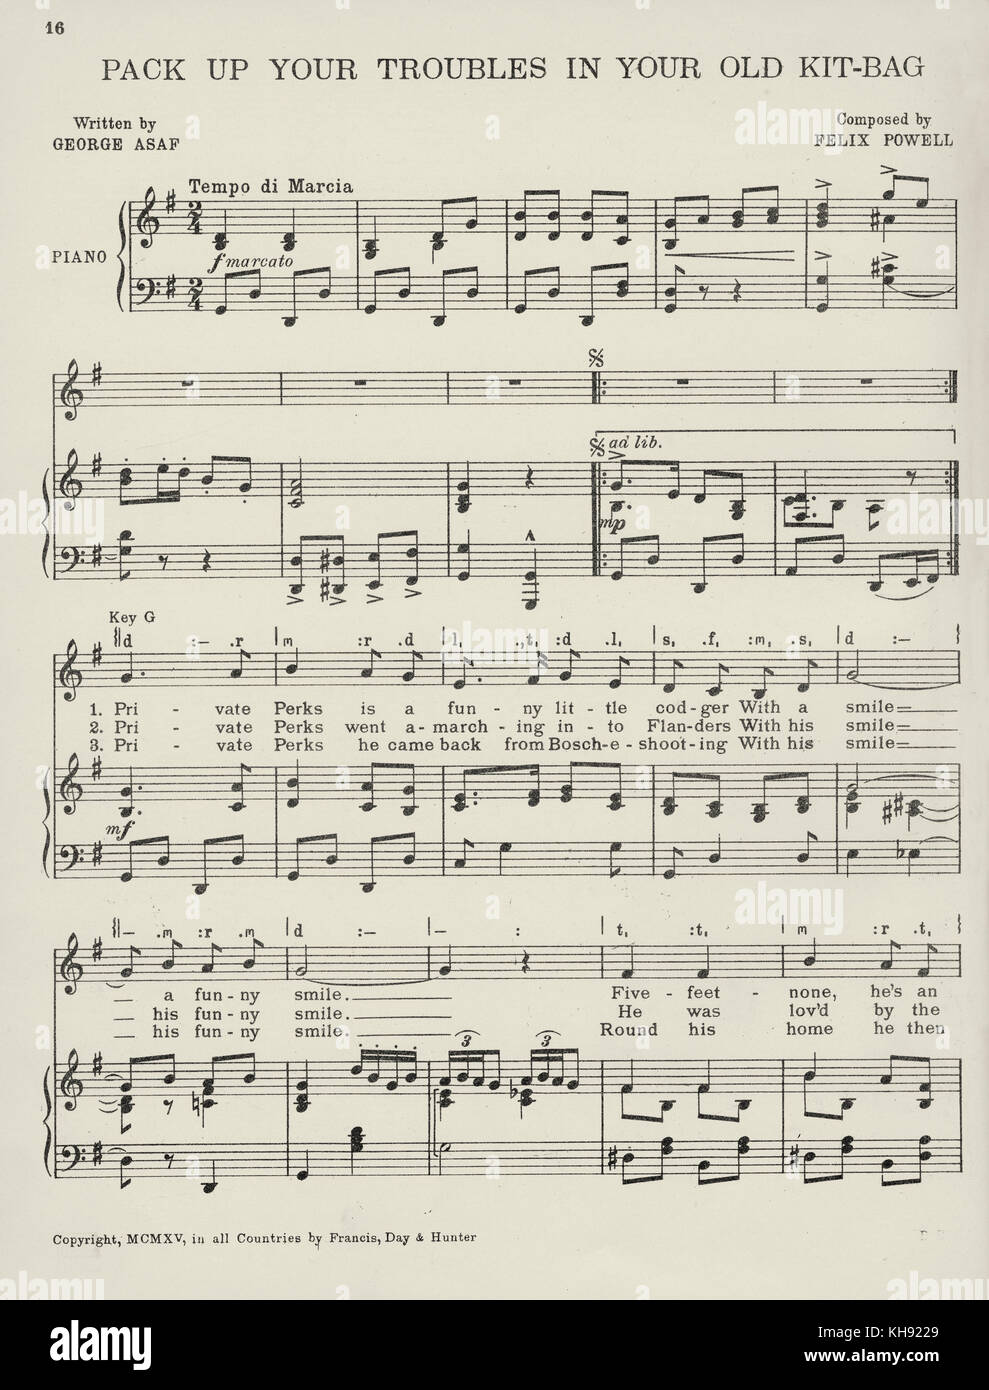 Pack Up Your Troubles in Your Old Kit- Bag' - song composed by Felix Powell  with lyrics by George Asaf. 1915. Page 1 of 3. Popular during World War 1  Stock Photo - Alamy